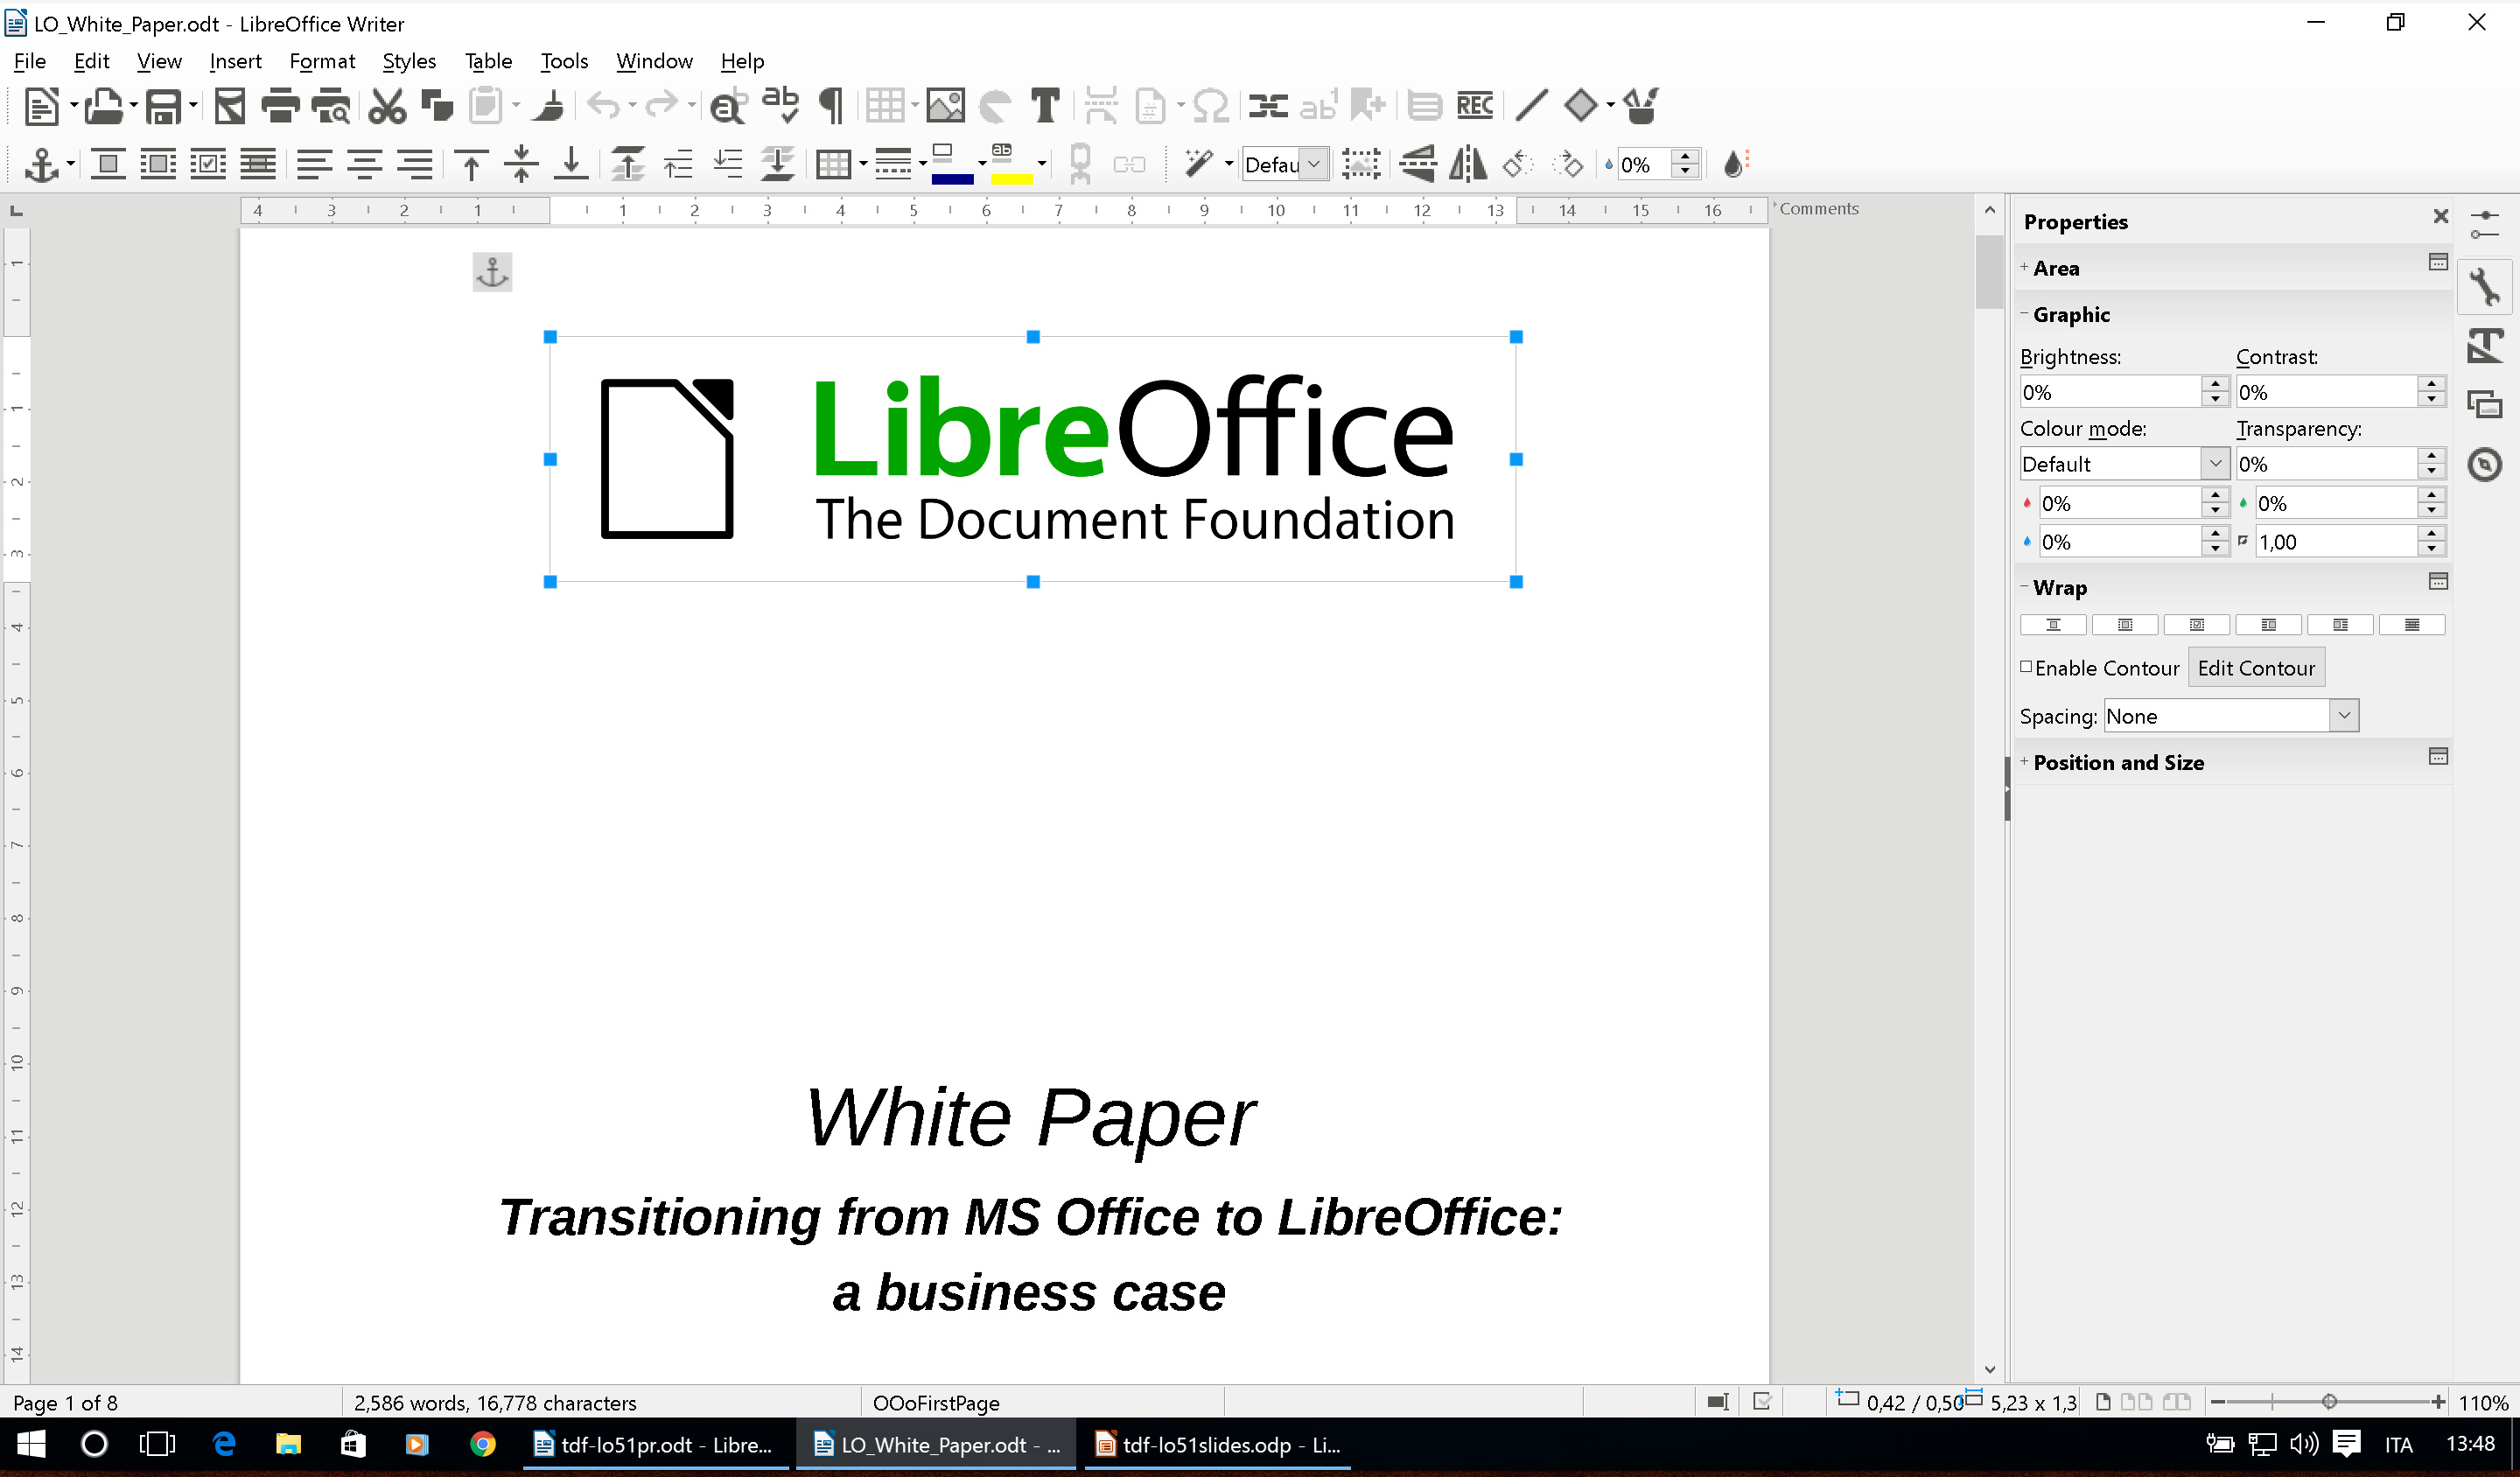 libre office is a free and open source software